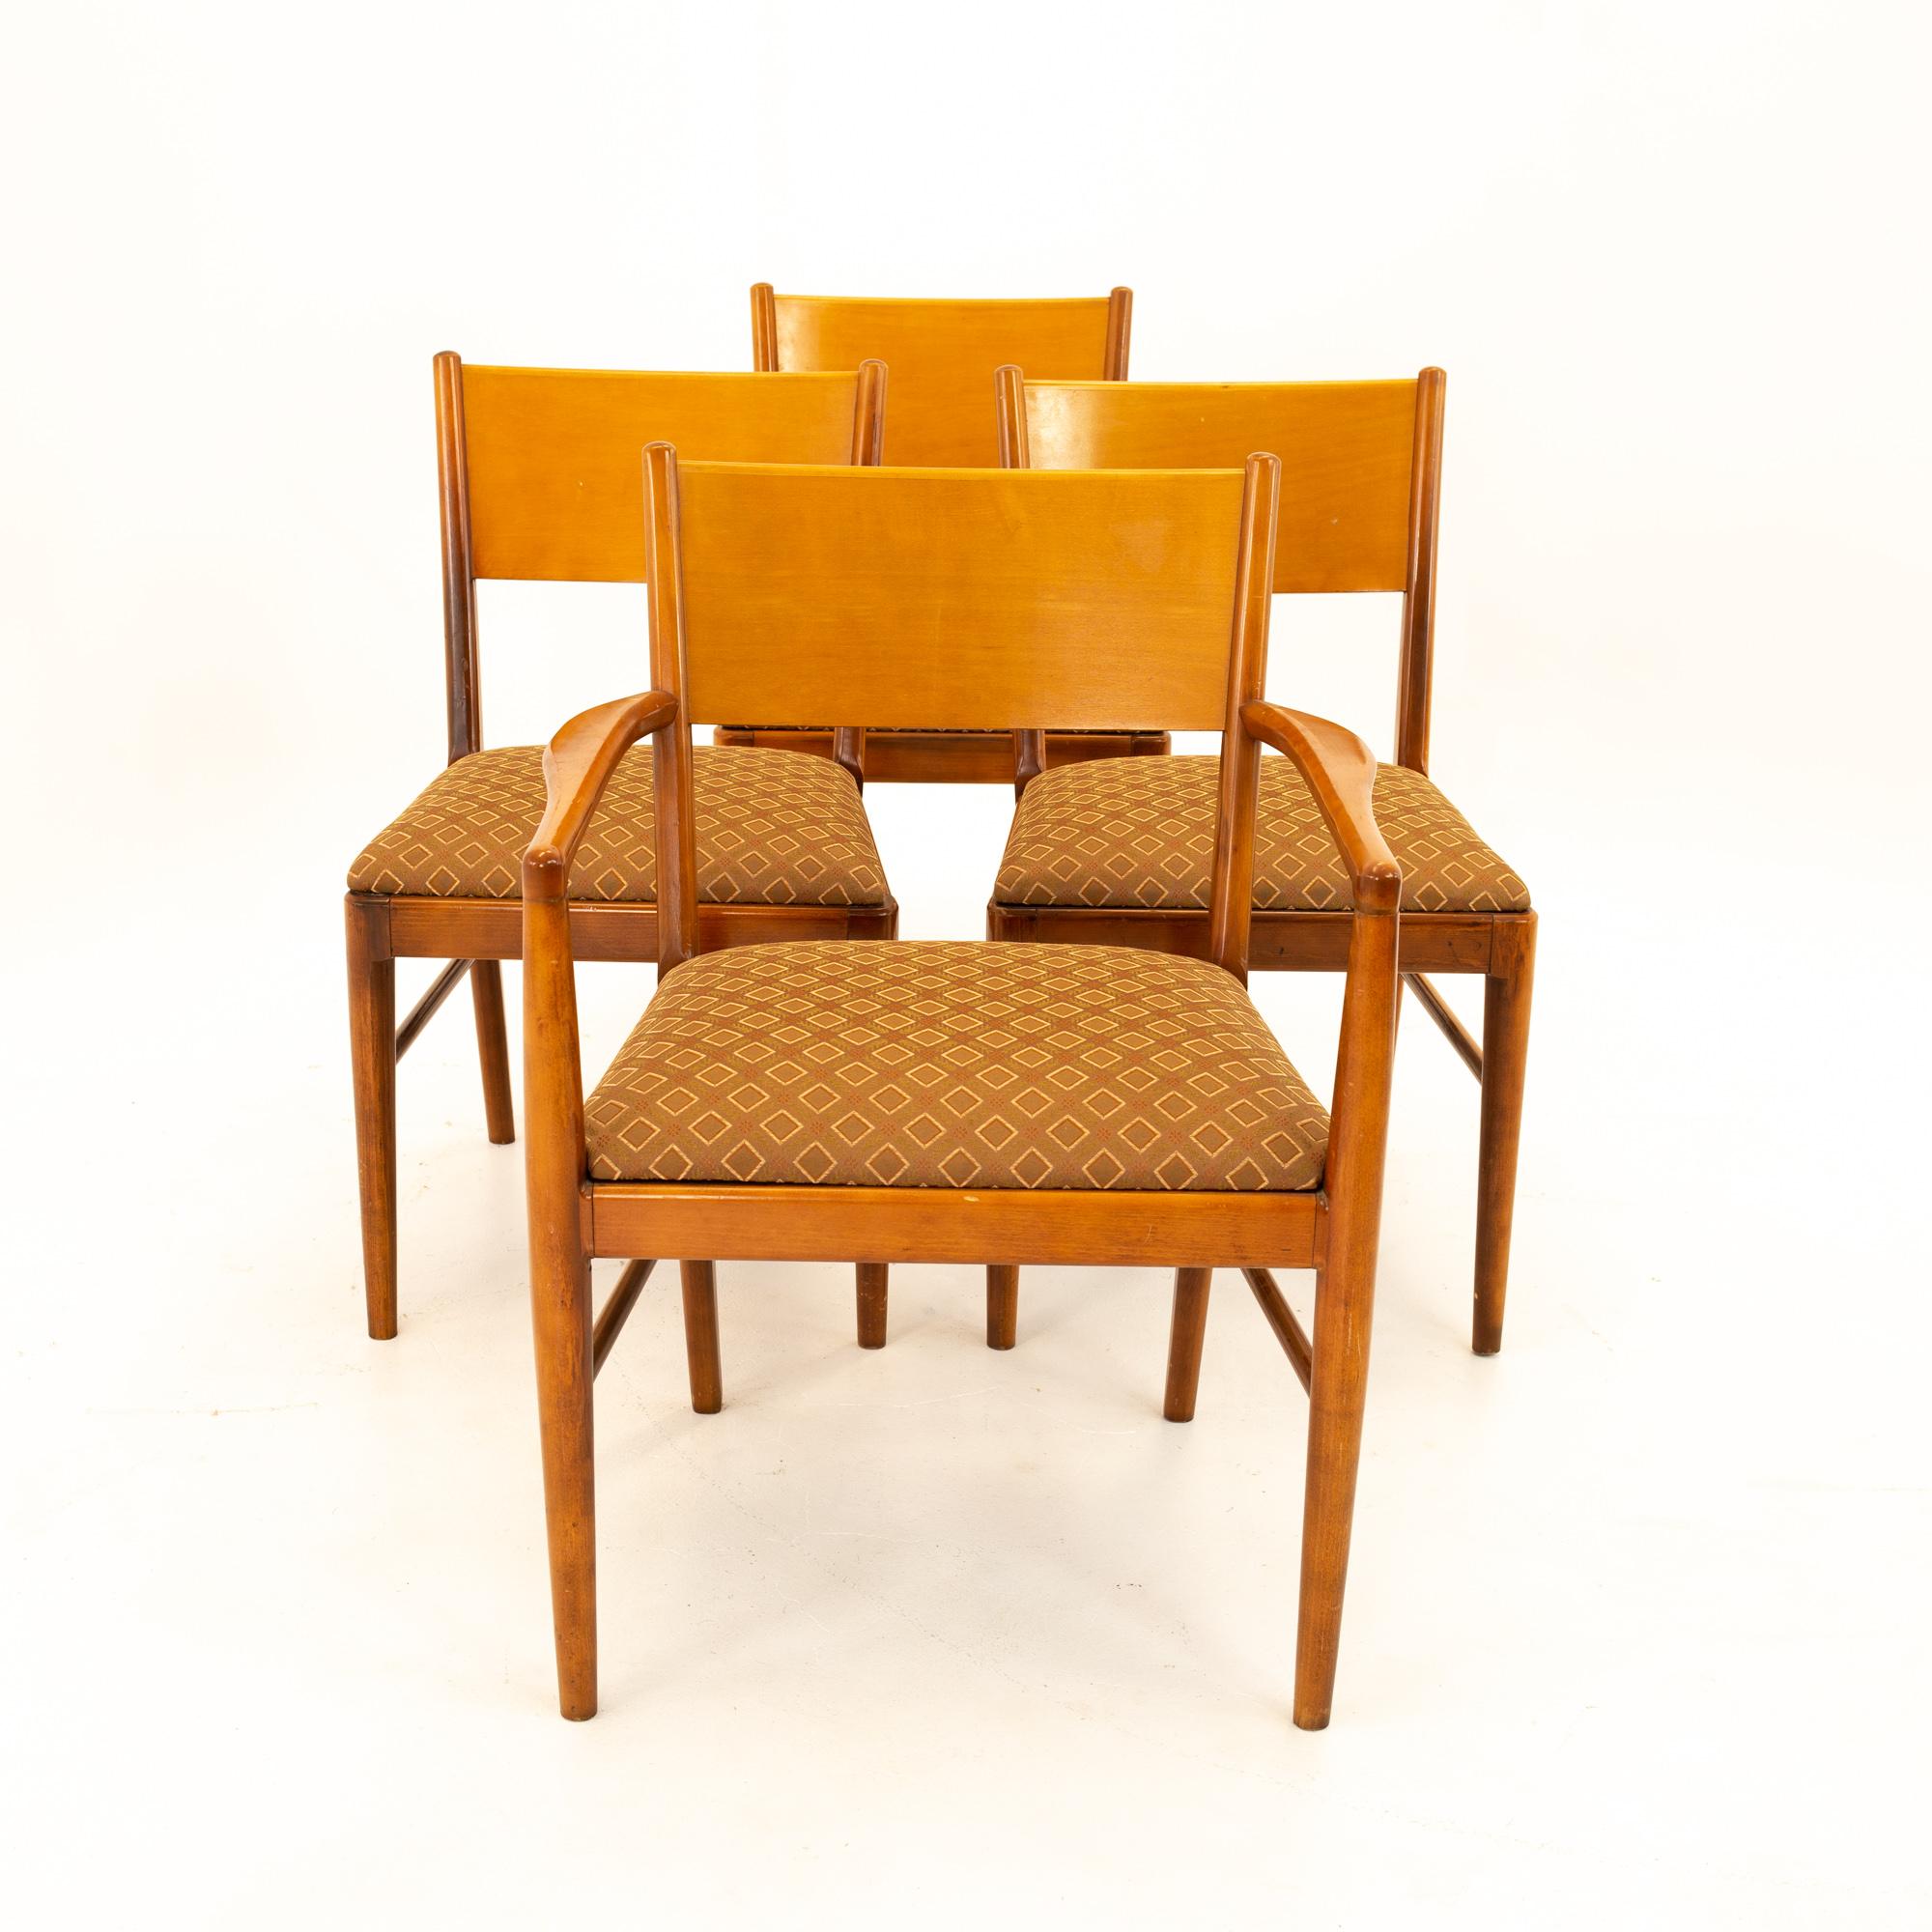 Broyhill style Mid Century walnut dining chairs - set of 5
Each chair measures: 23.5 wide x 19 deep x 32 high with a seat height of 18 inches
This price includes getting this set in what we call restored vintage condition. Upon purchase it is fixed